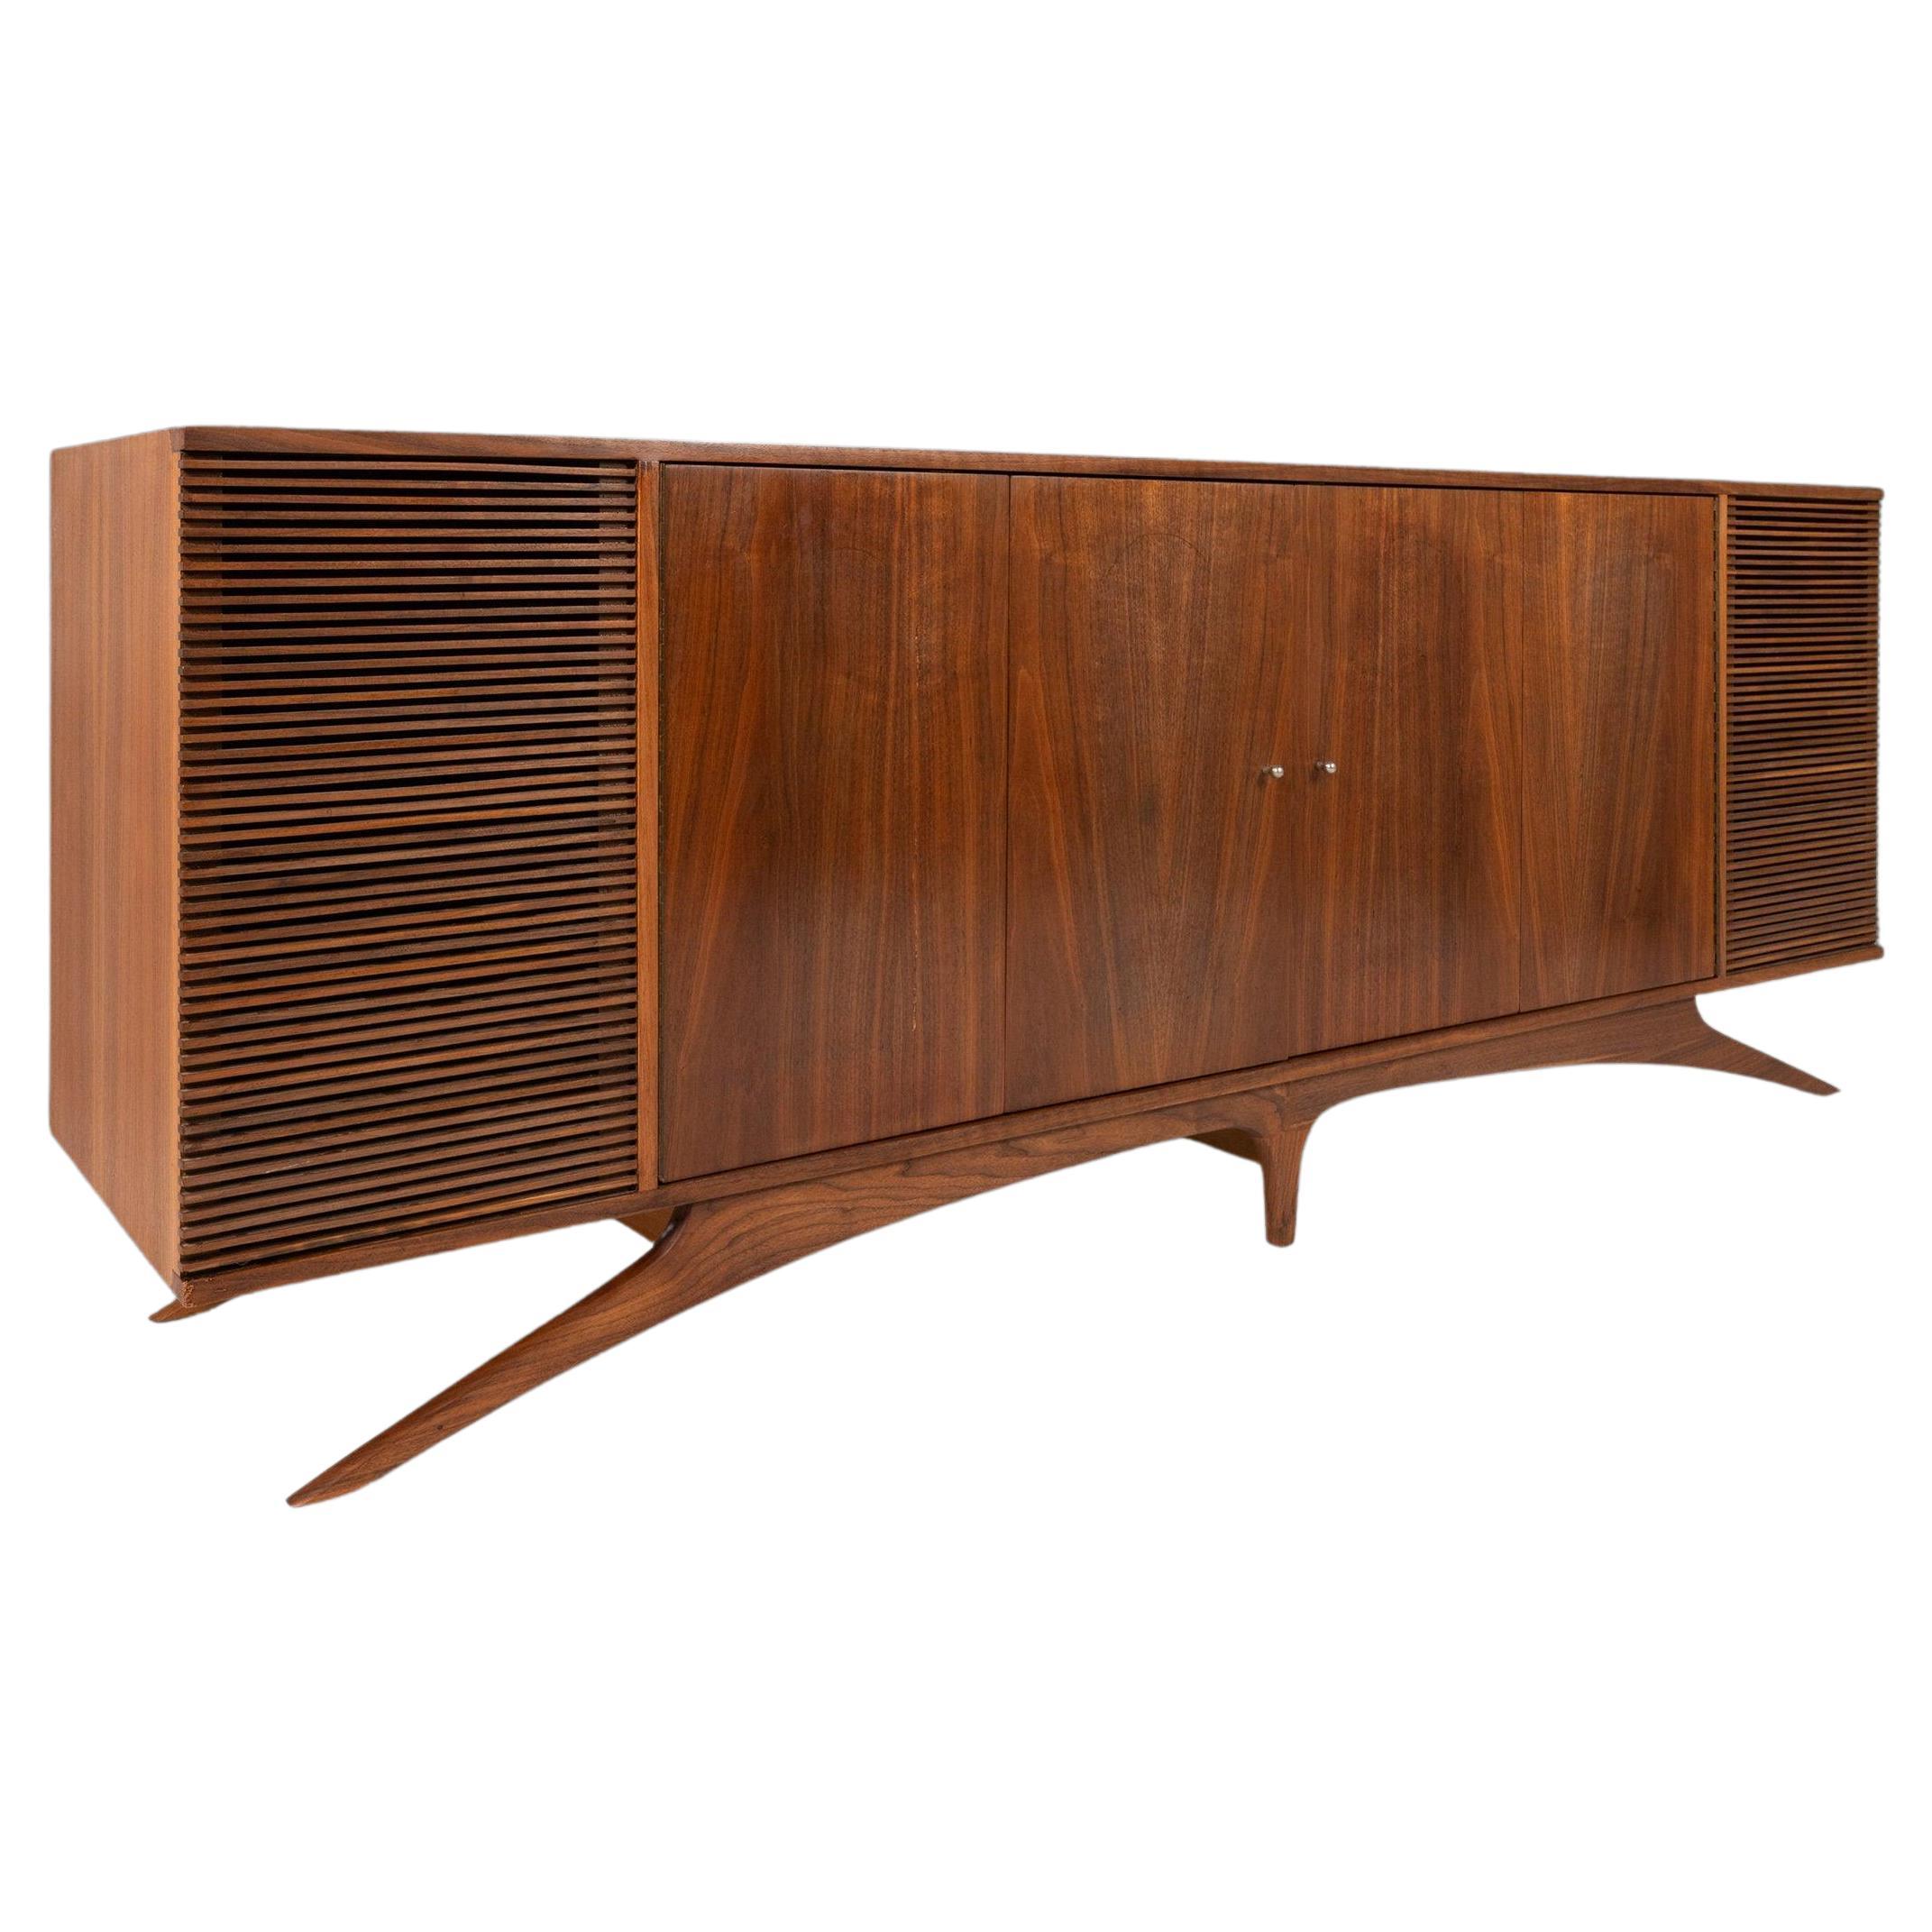 Credenza / Stereo Cabinet in Walnut in the Manner of Vladimir Kagan, USA, c 1960